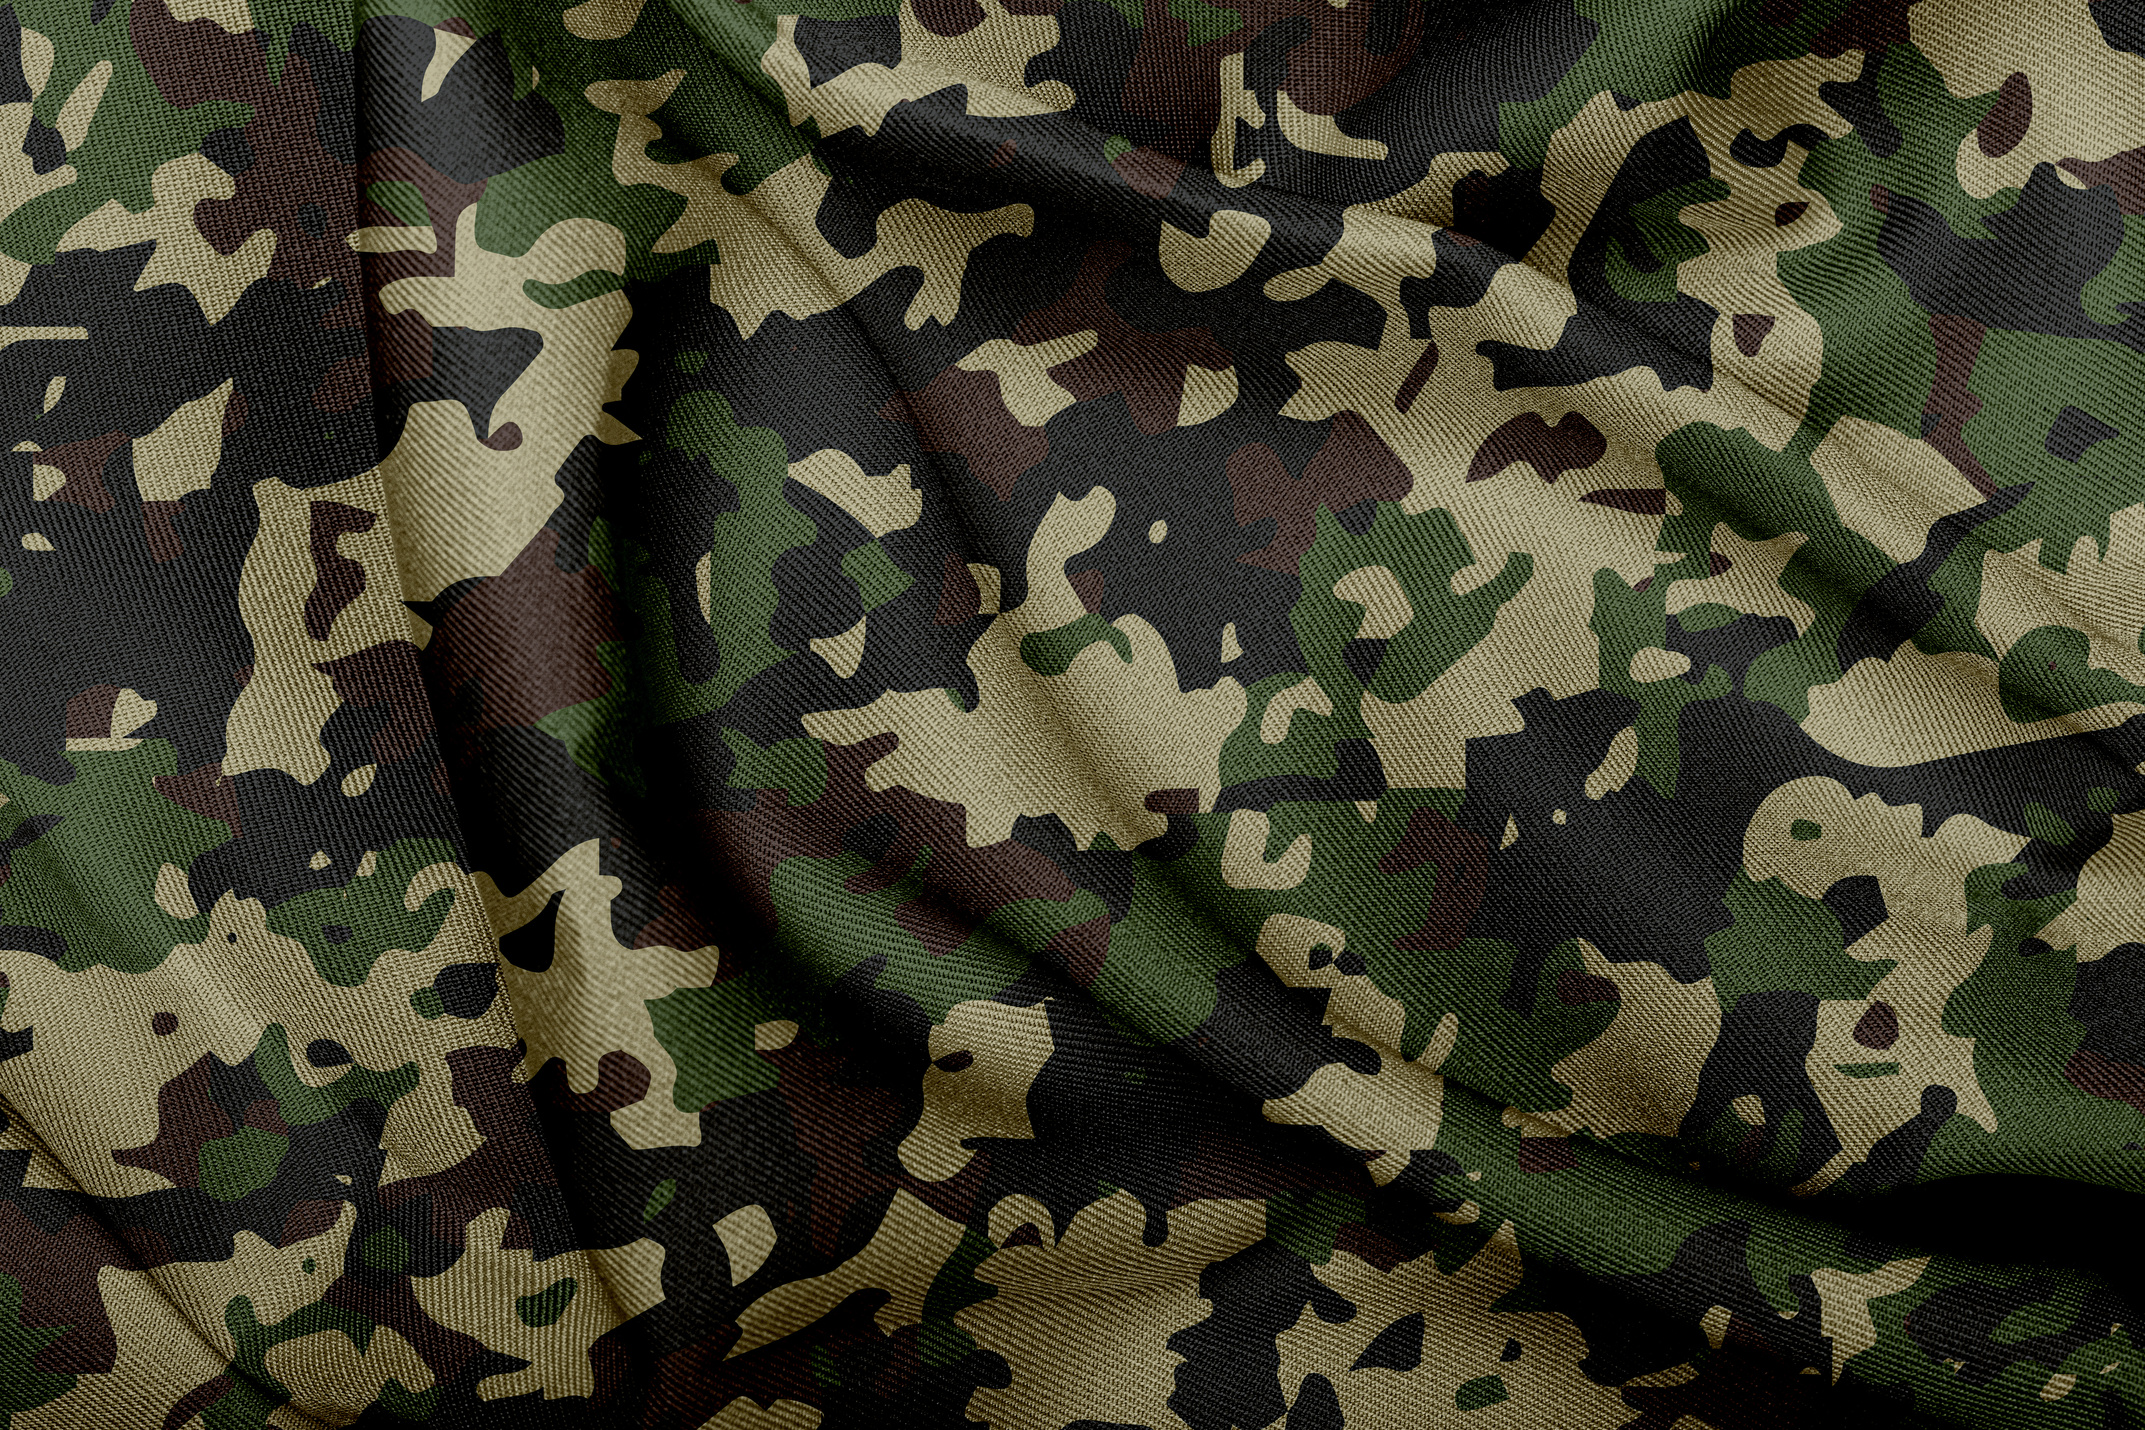 Camouflage pattern cloth texture background